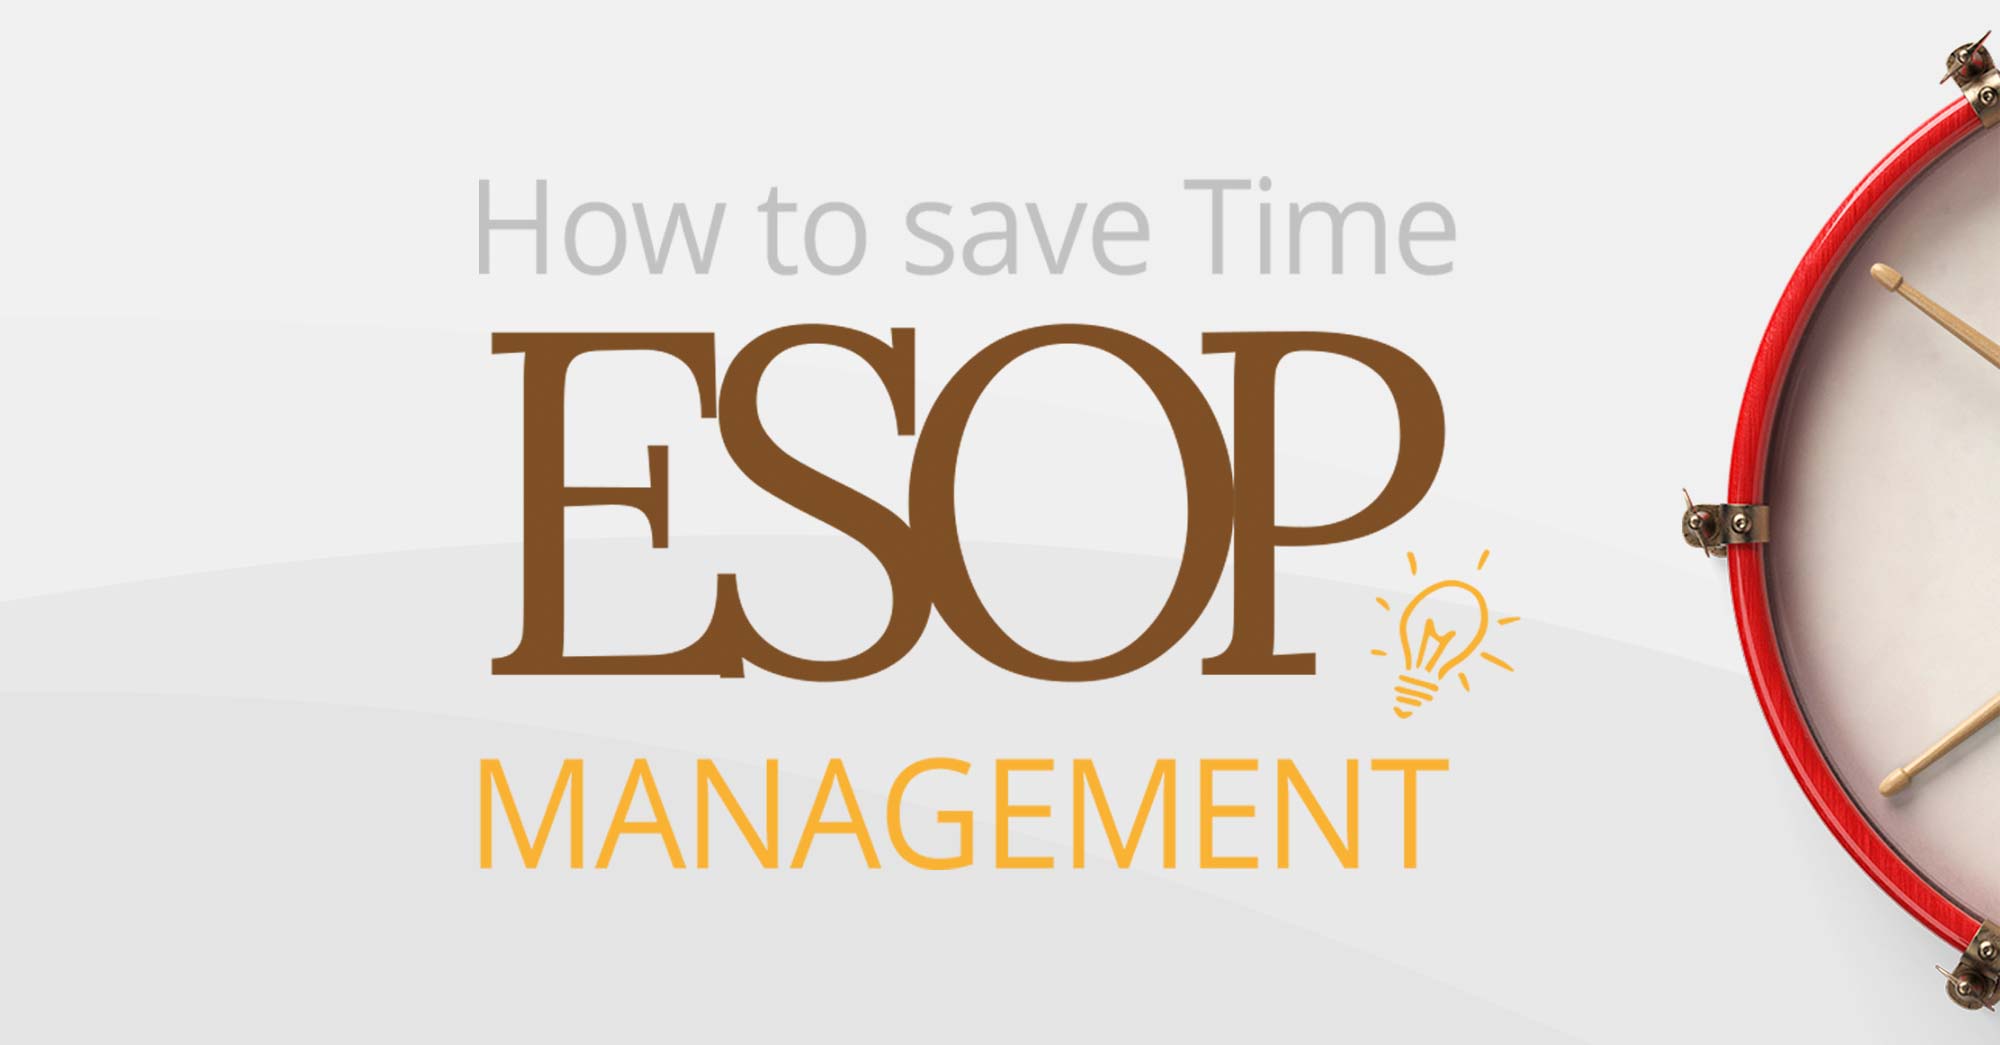 ESOP planning: our checklist to save you time